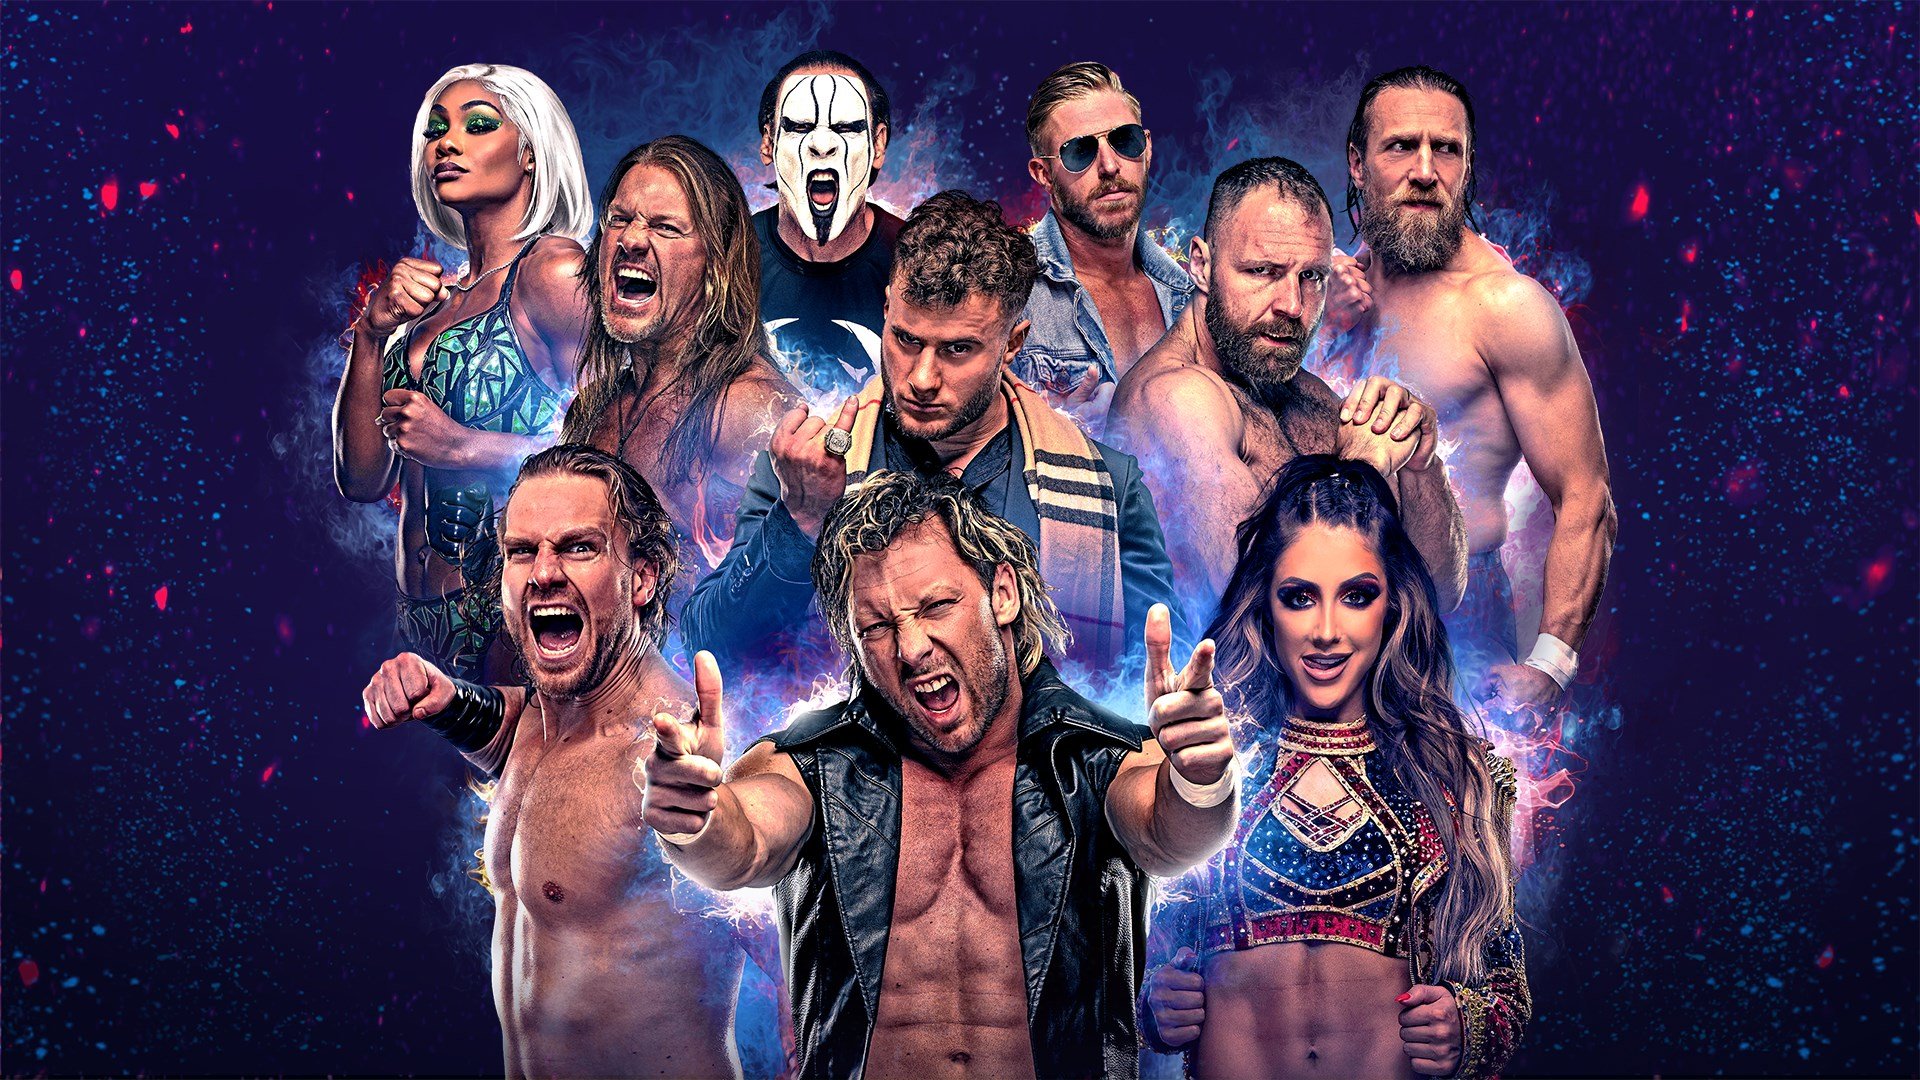 AEW: Fight Forever cover image